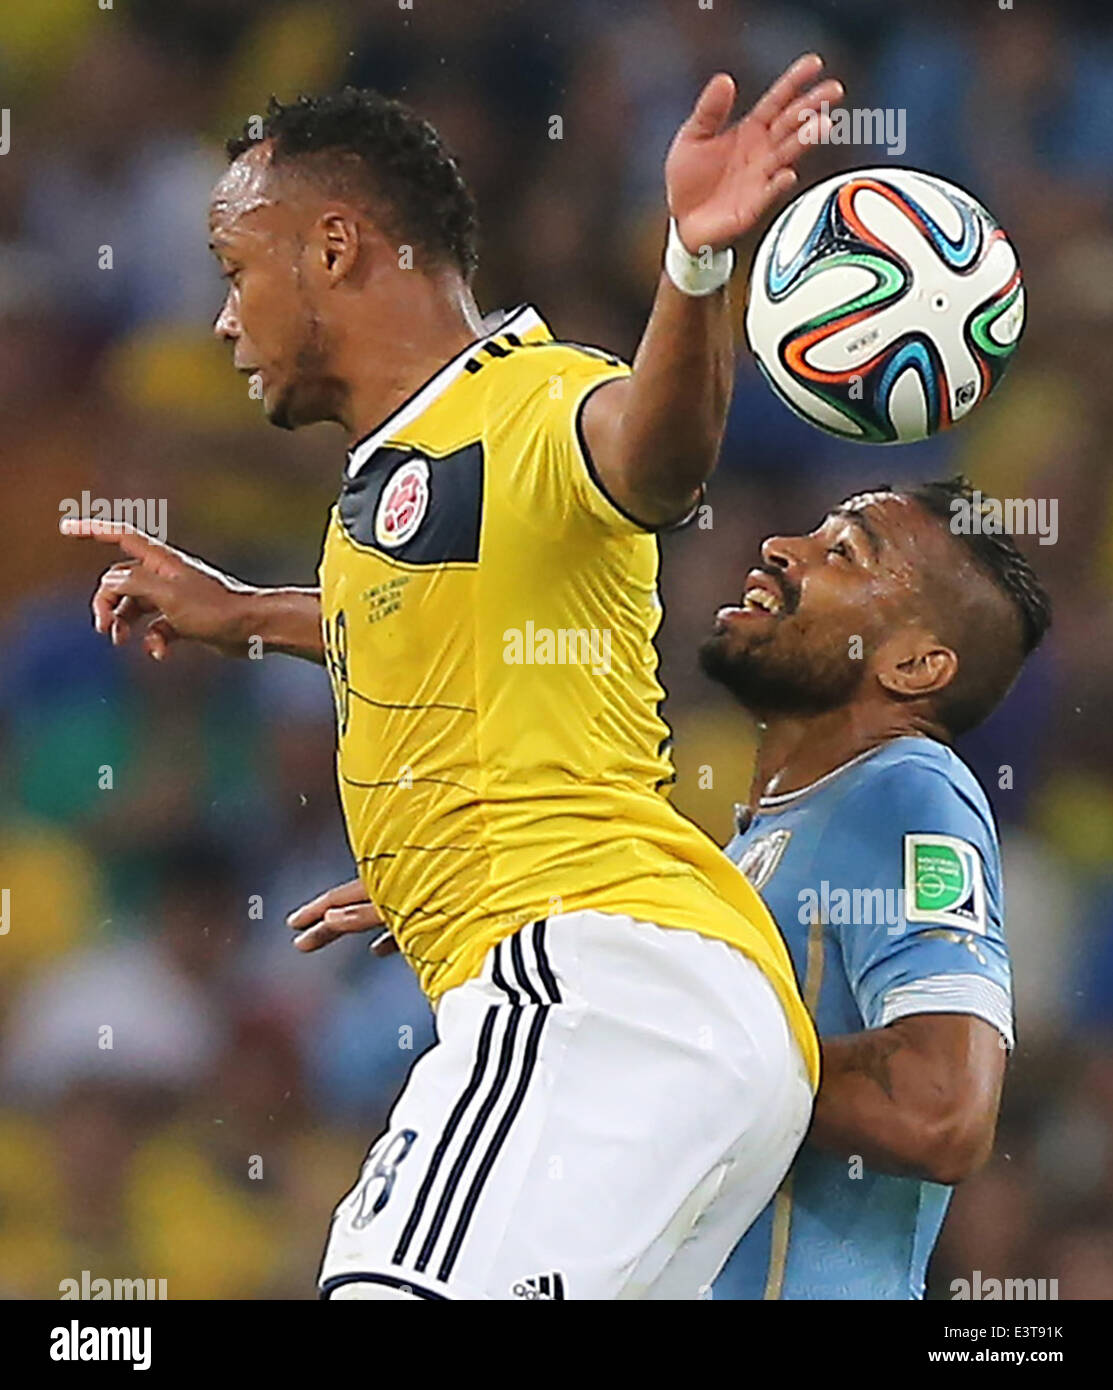 Rio De Janeiro, Brazil. 28th June, 2014. Colombia's Juan Zuniga jumps for the ball during a Round of 16 match between Colombia and Uruguay of 2014 FIFA World Cup at the Estadio do Maracana Stadium in Rio de Janeiro, Brazil, on June 28, 2014. Colombia won 2-0 over Uruguay on Saturday. Credit:  Xu Zijian/Xinhua/Alamy Live News Stock Photo